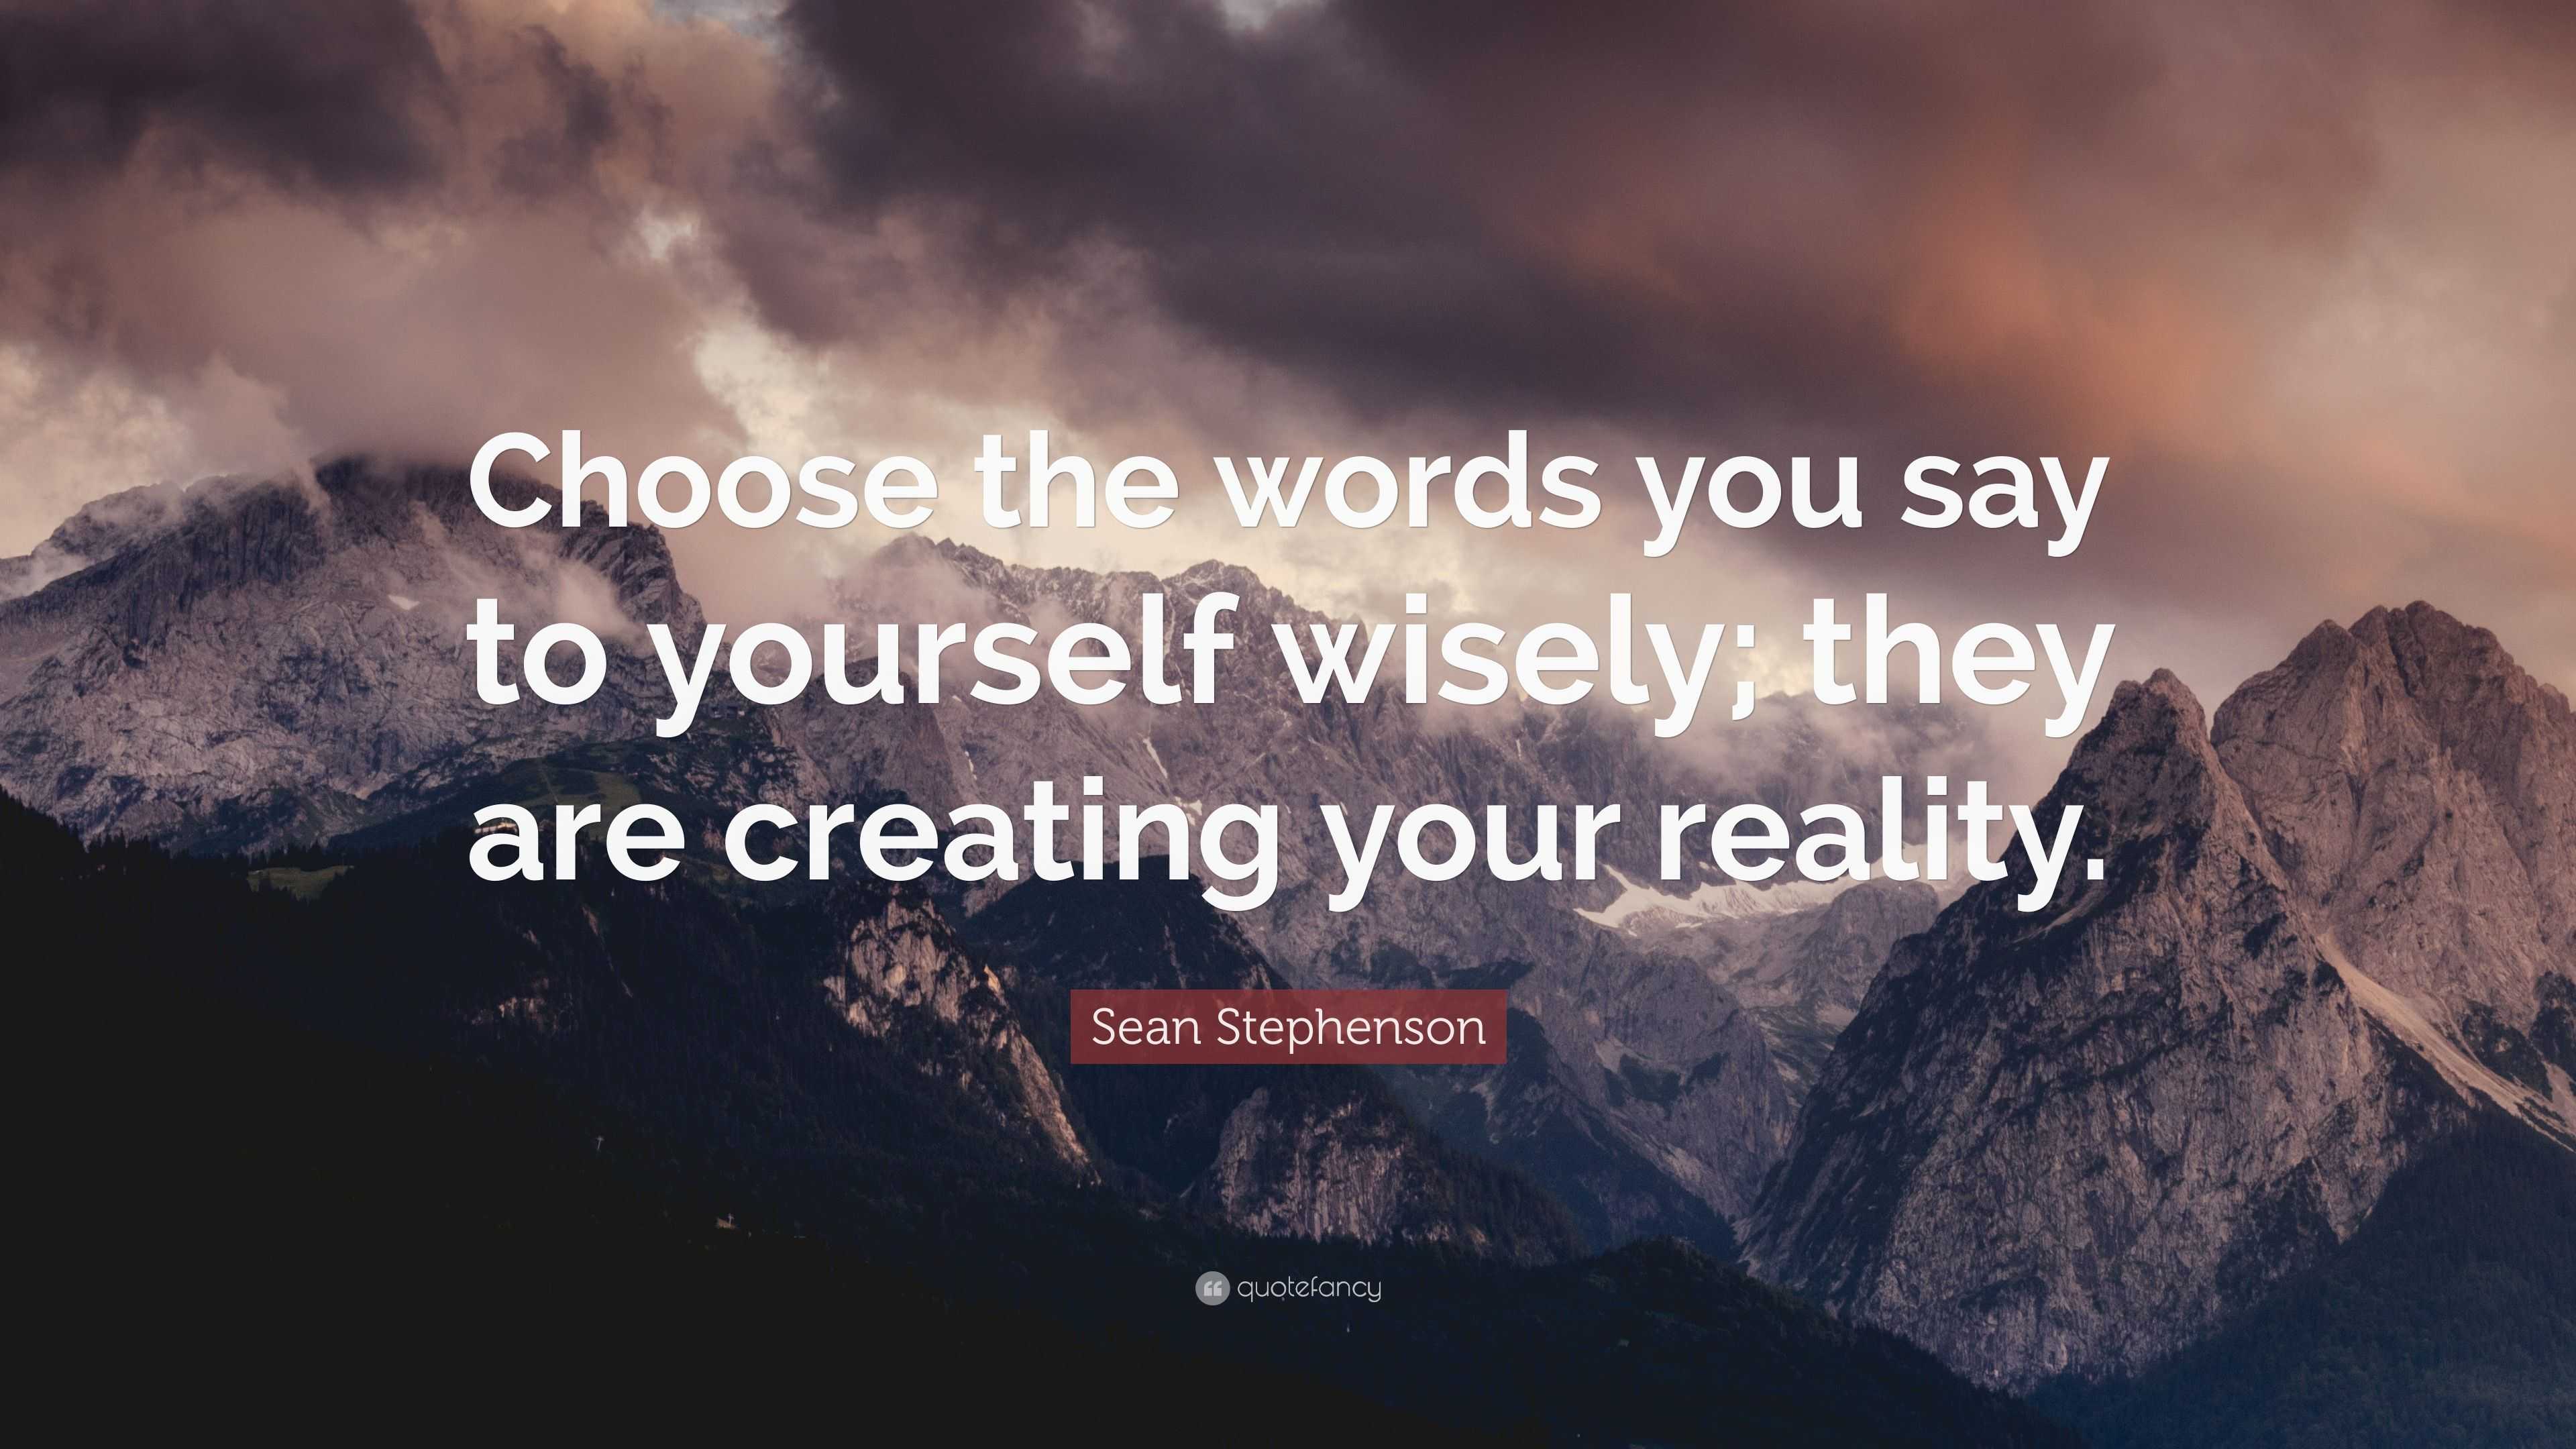 Sean Stephenson Quote: "Choose the words you say to ...